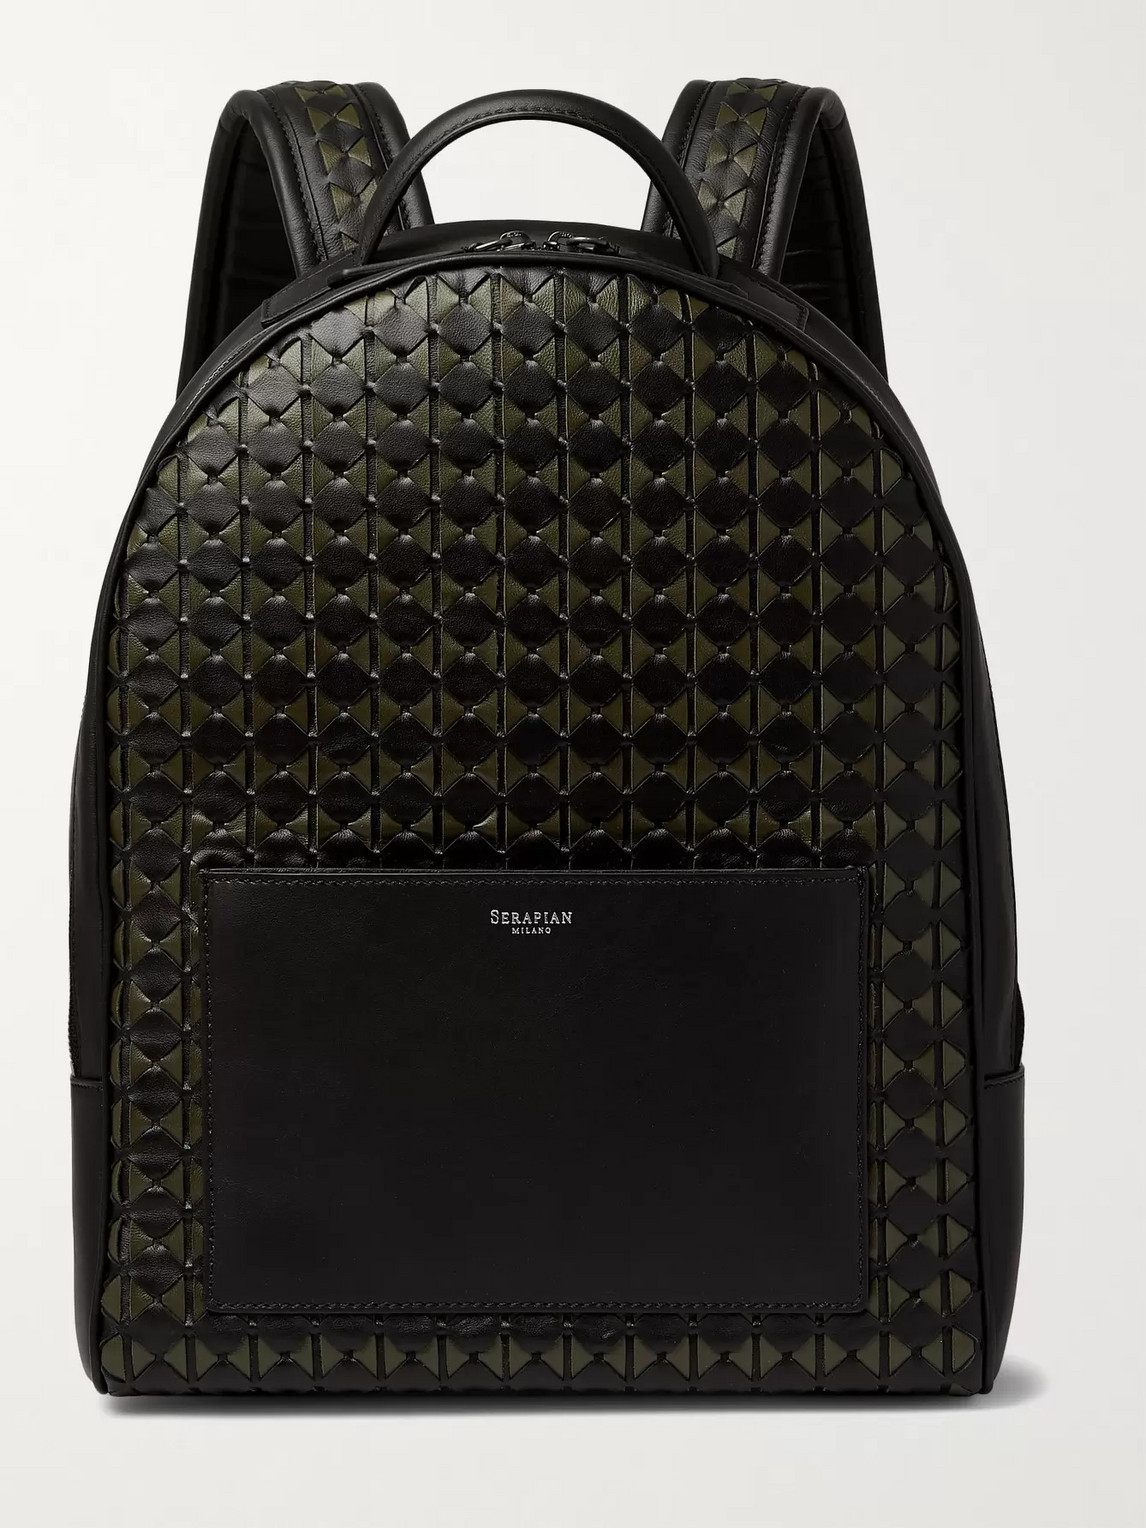 Serapian Compact Mosaico Woven Leather Backpack In Green